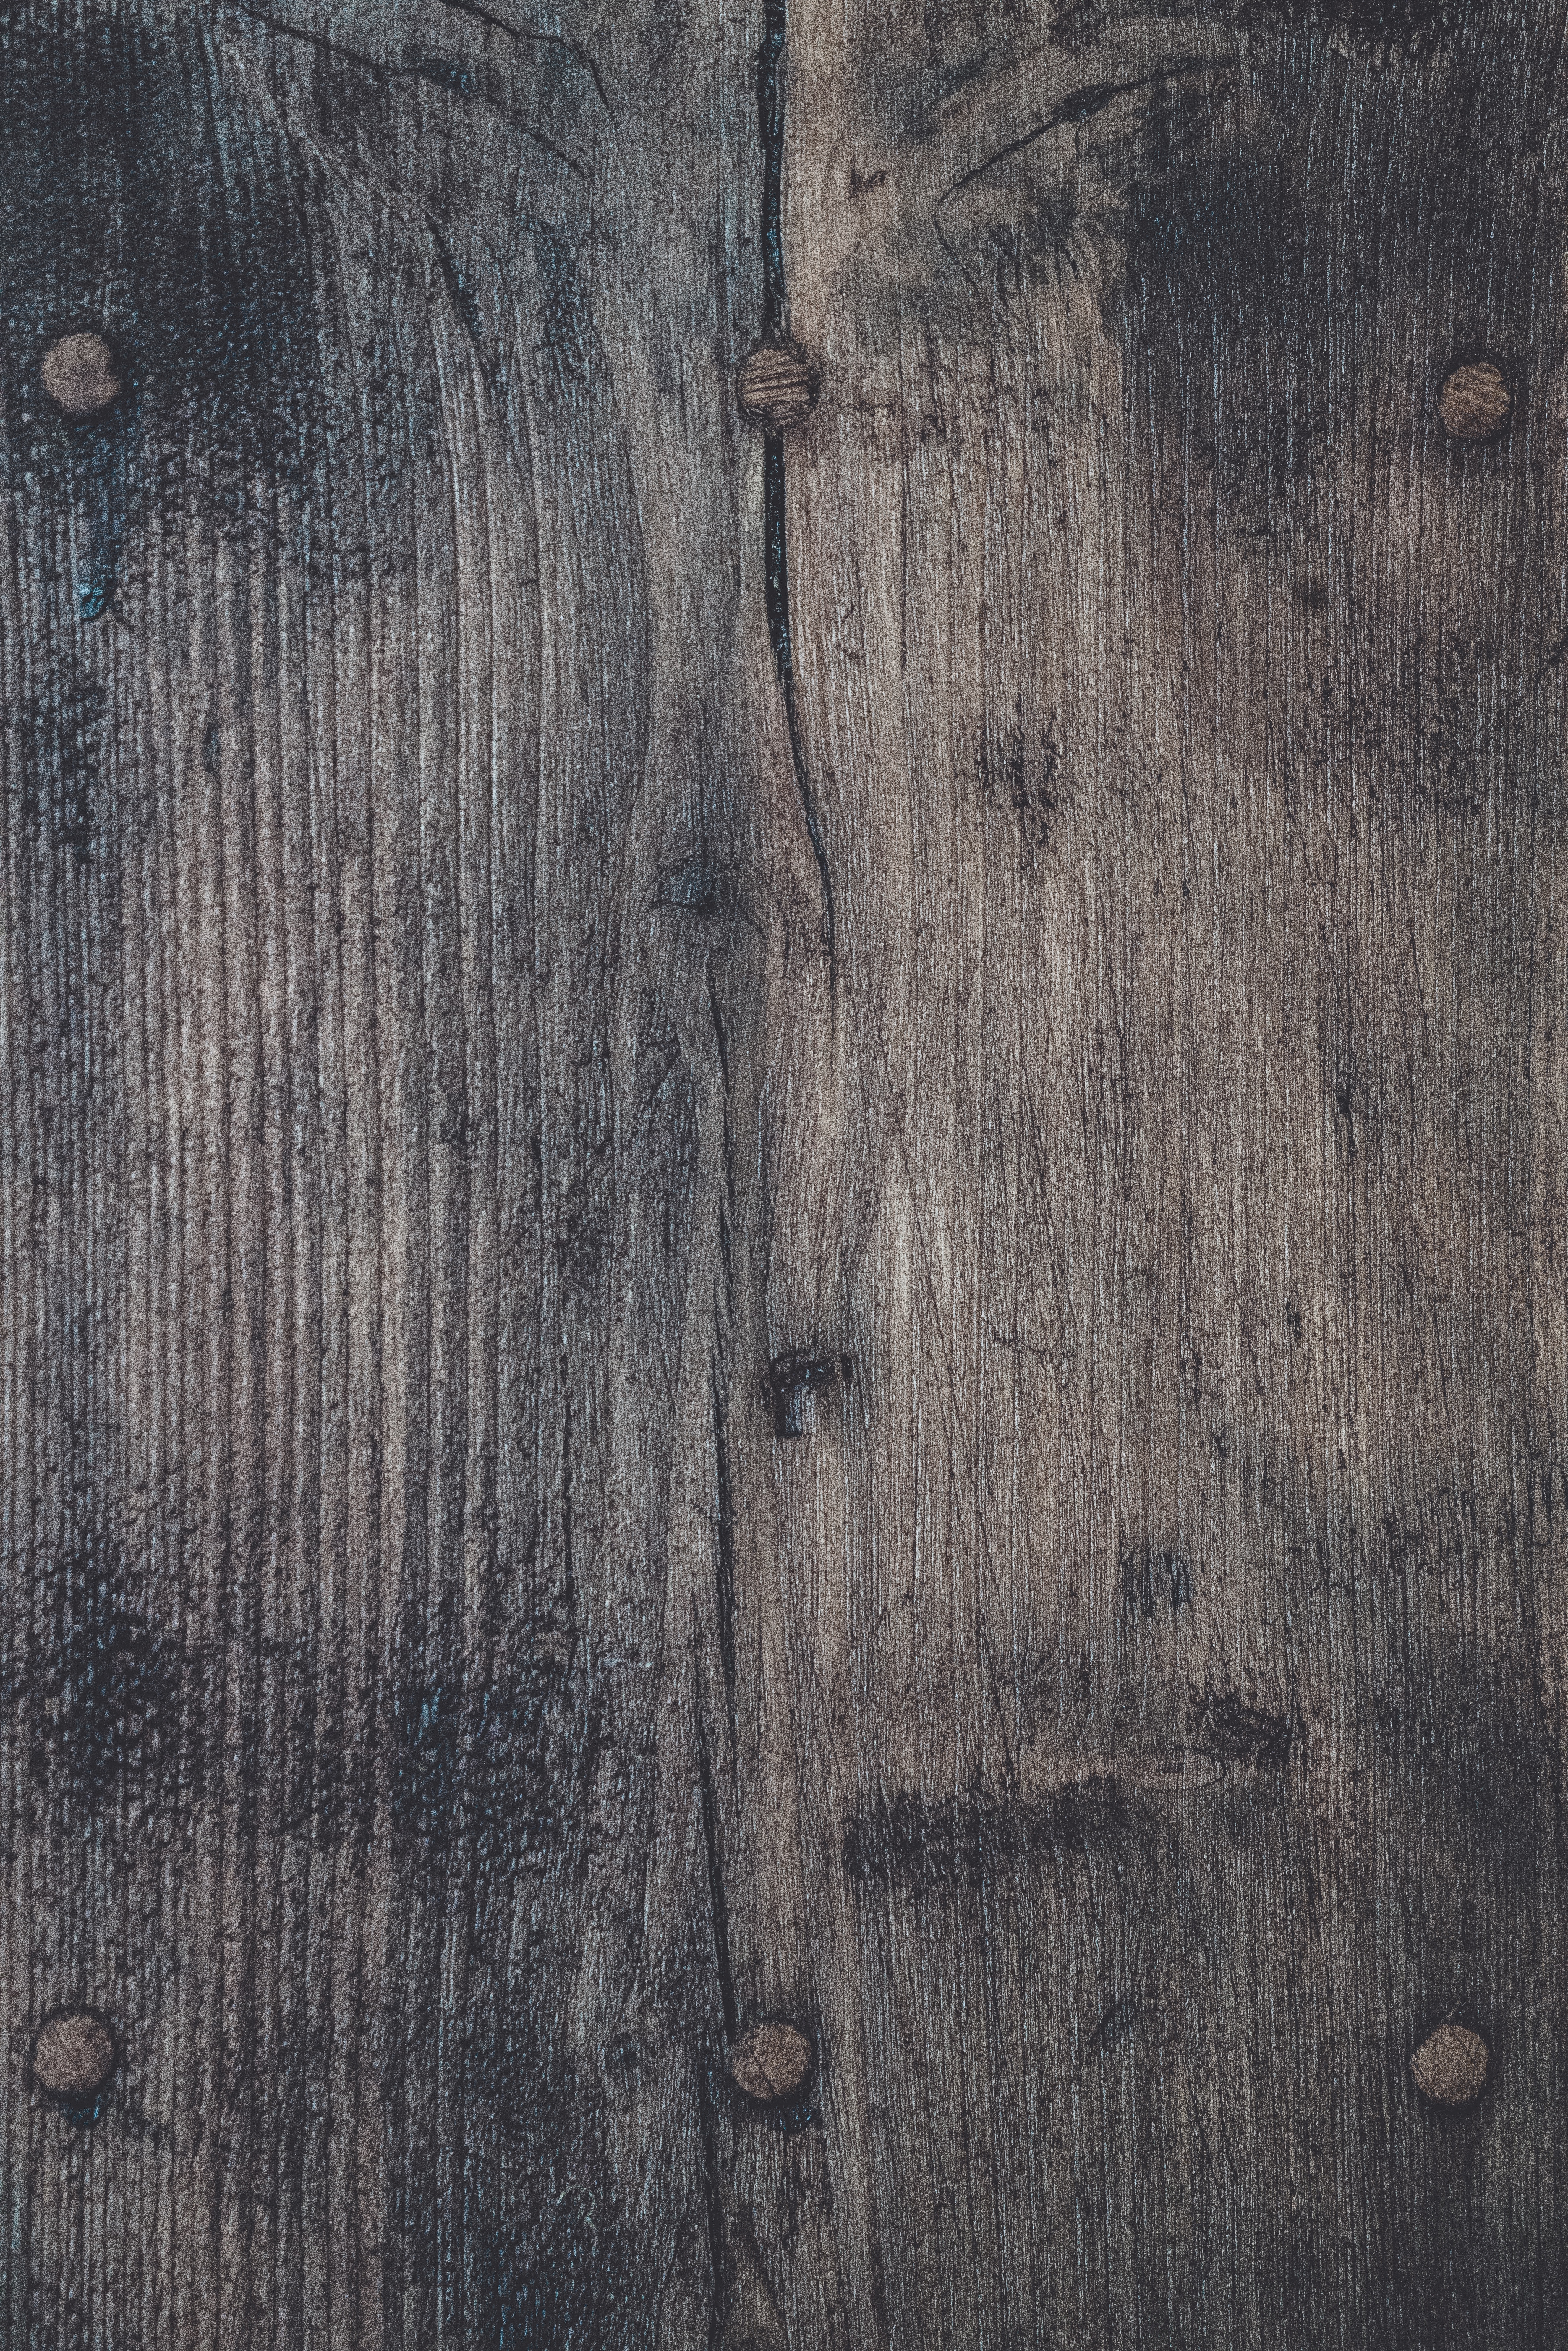 texture, wooden, textures, surface, ribbed, wood cellphone